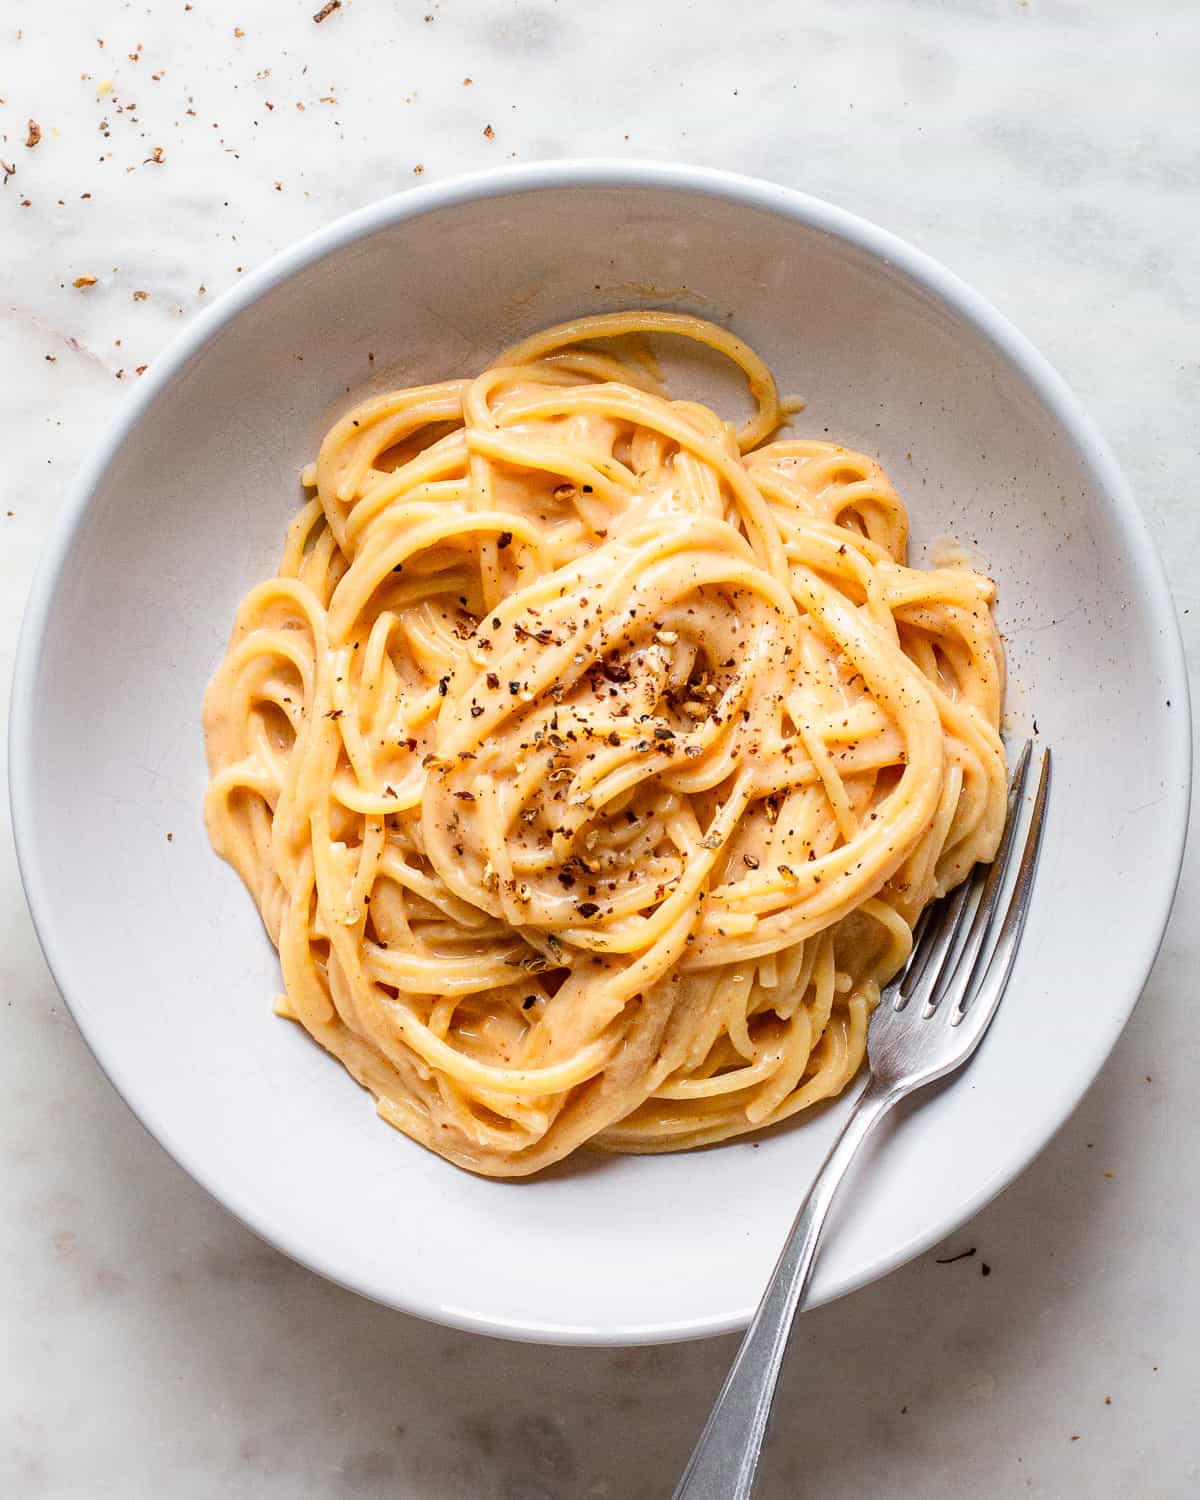 Cooked spaghetti tossed in a light orange sauce on a white ceramic plate.